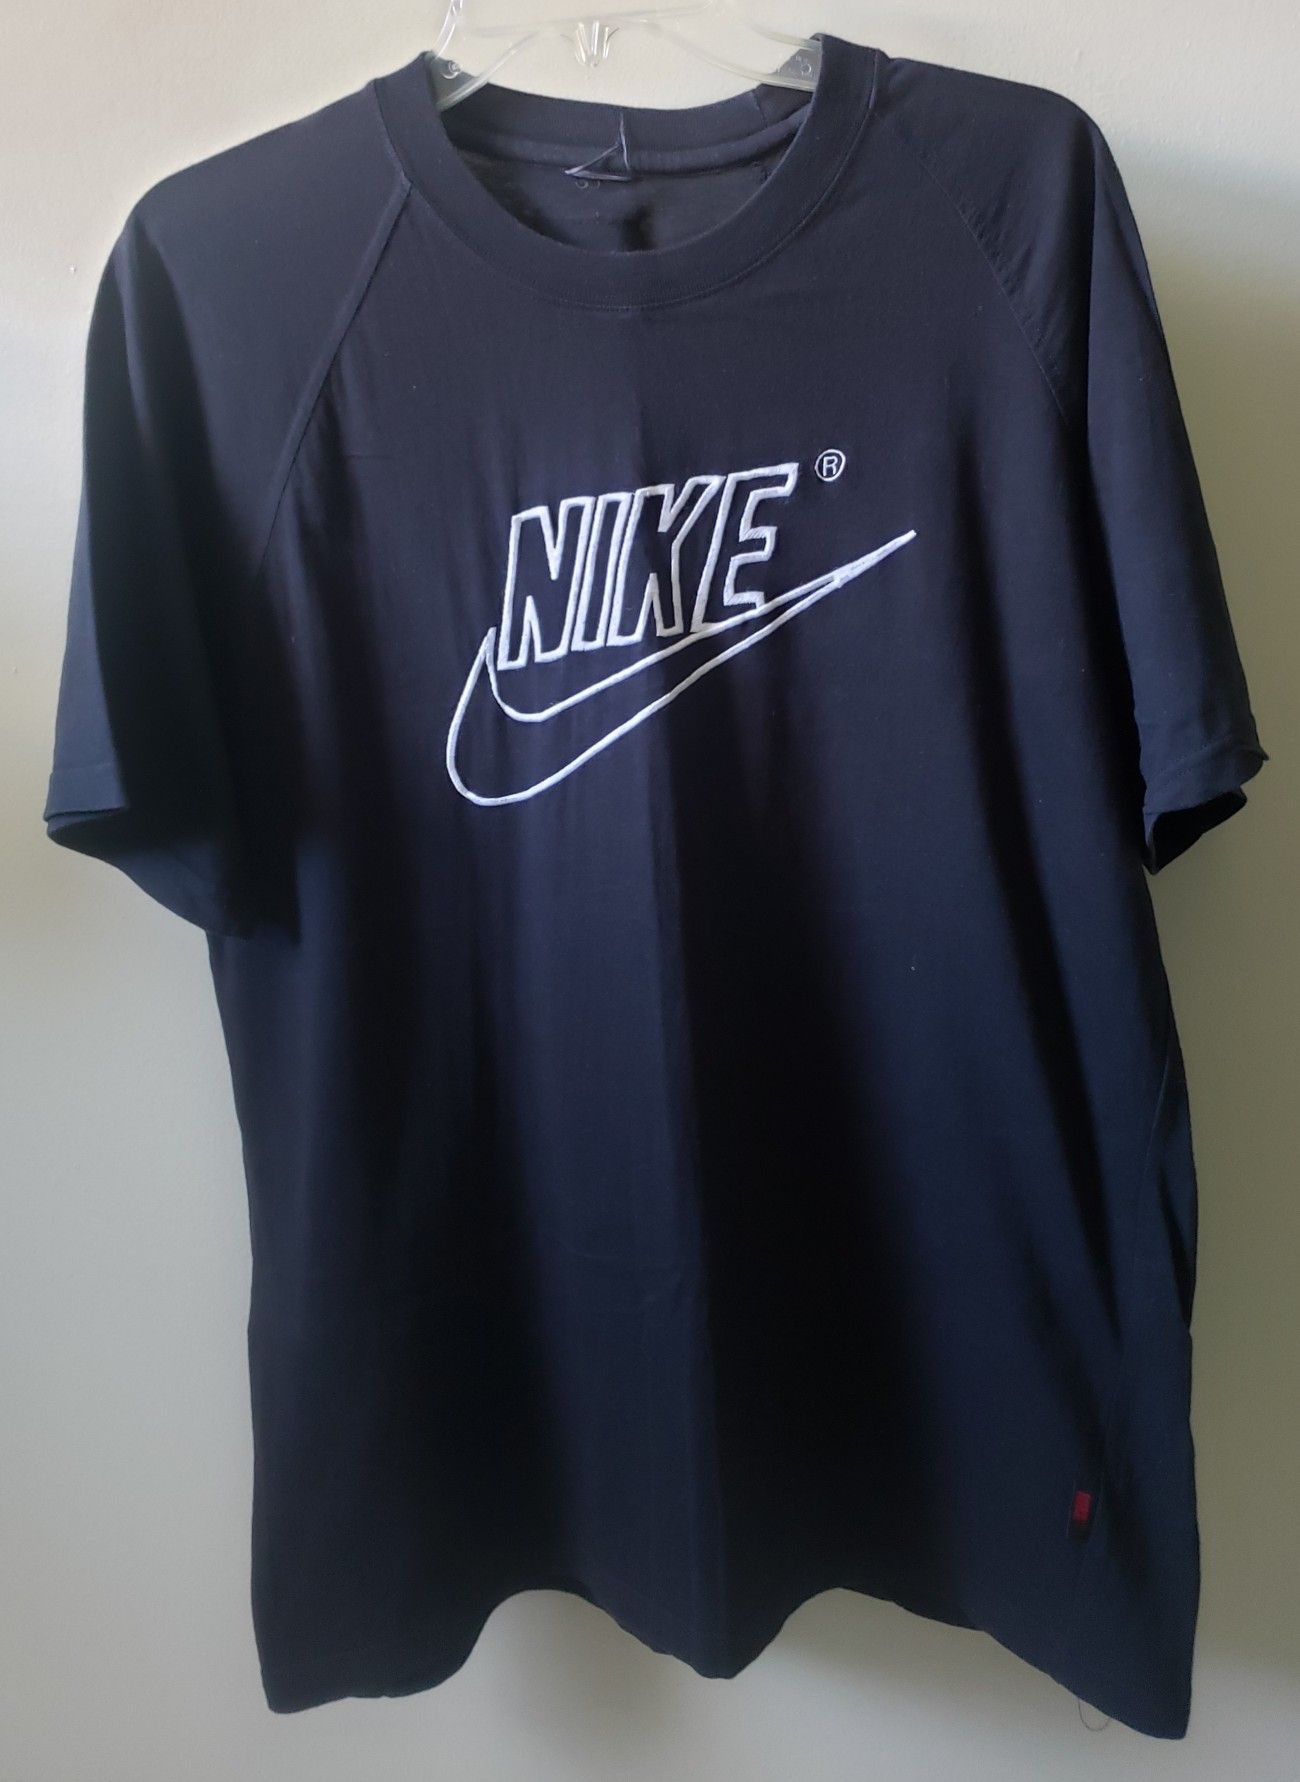 Vintage Nike embroidered 3m tee size L